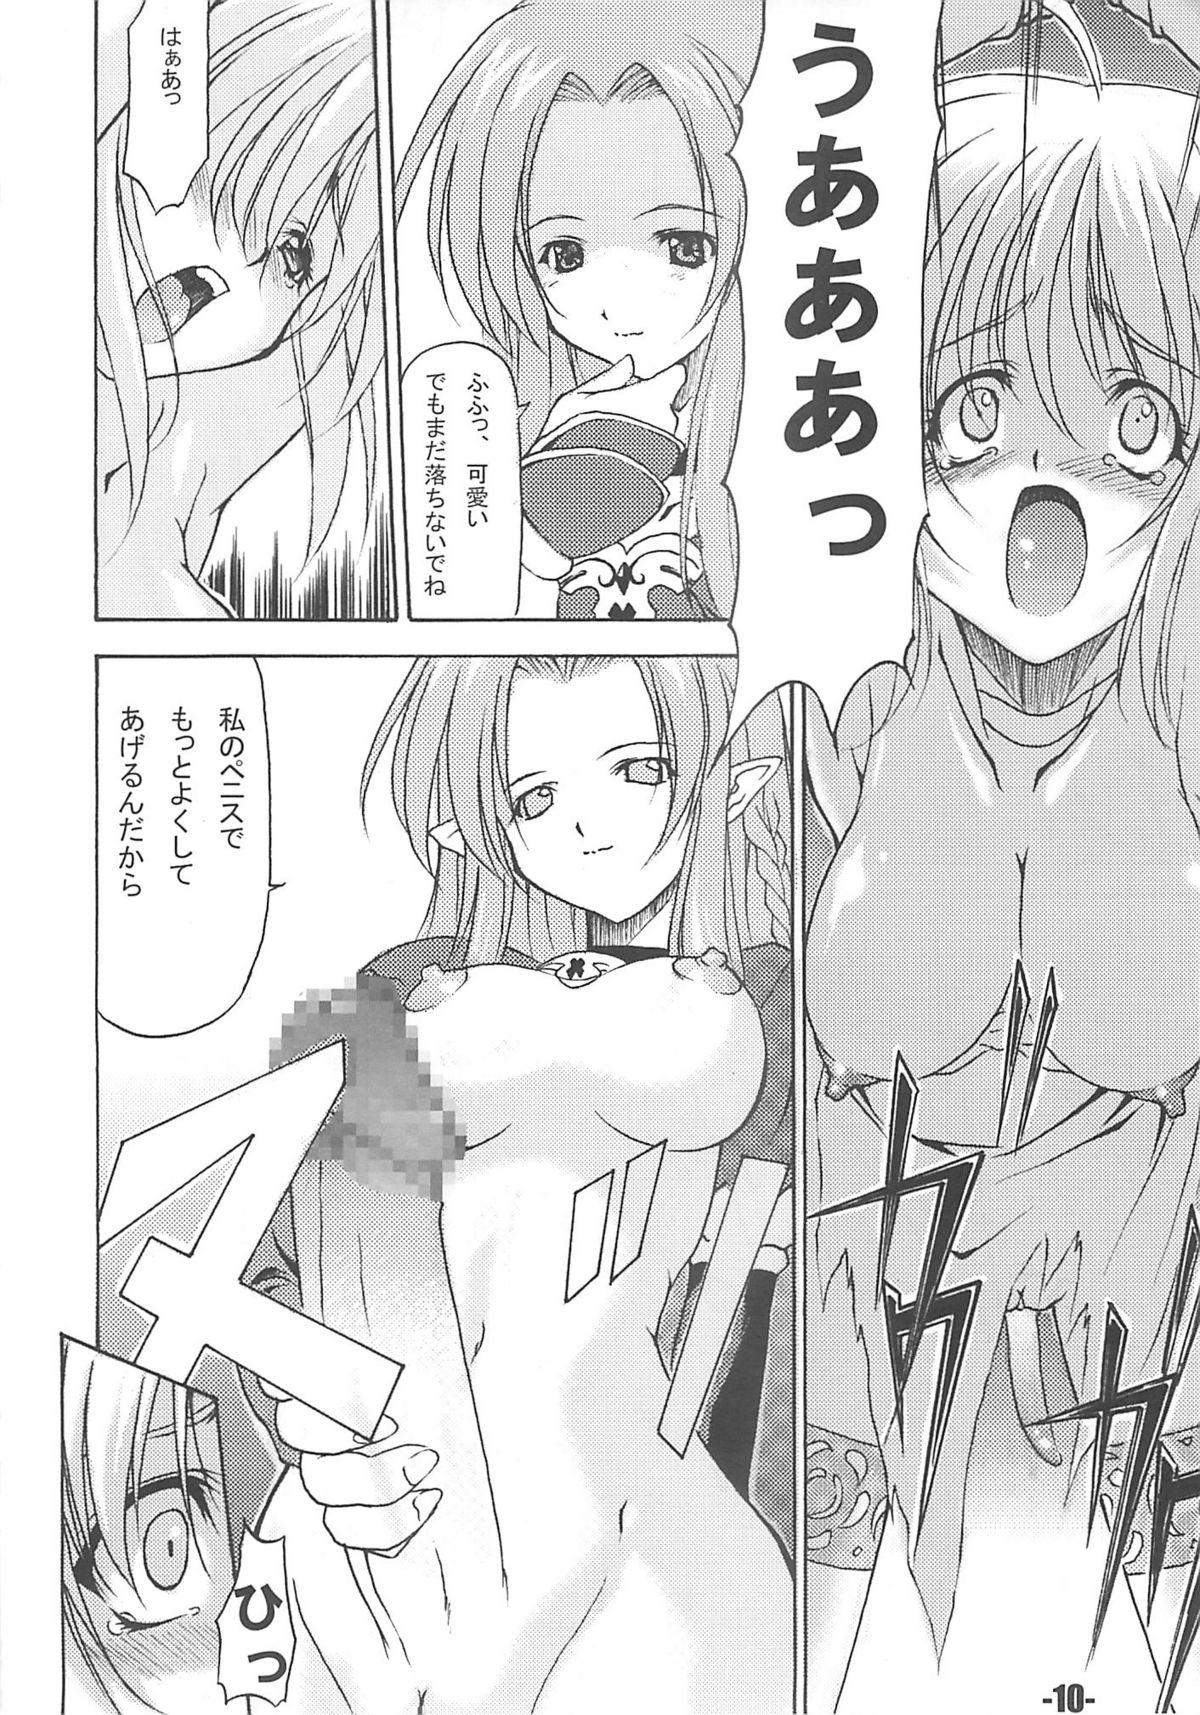 Blowjob Porn EXtra stage vol. 13 - Fate stay night Belly - Page 9